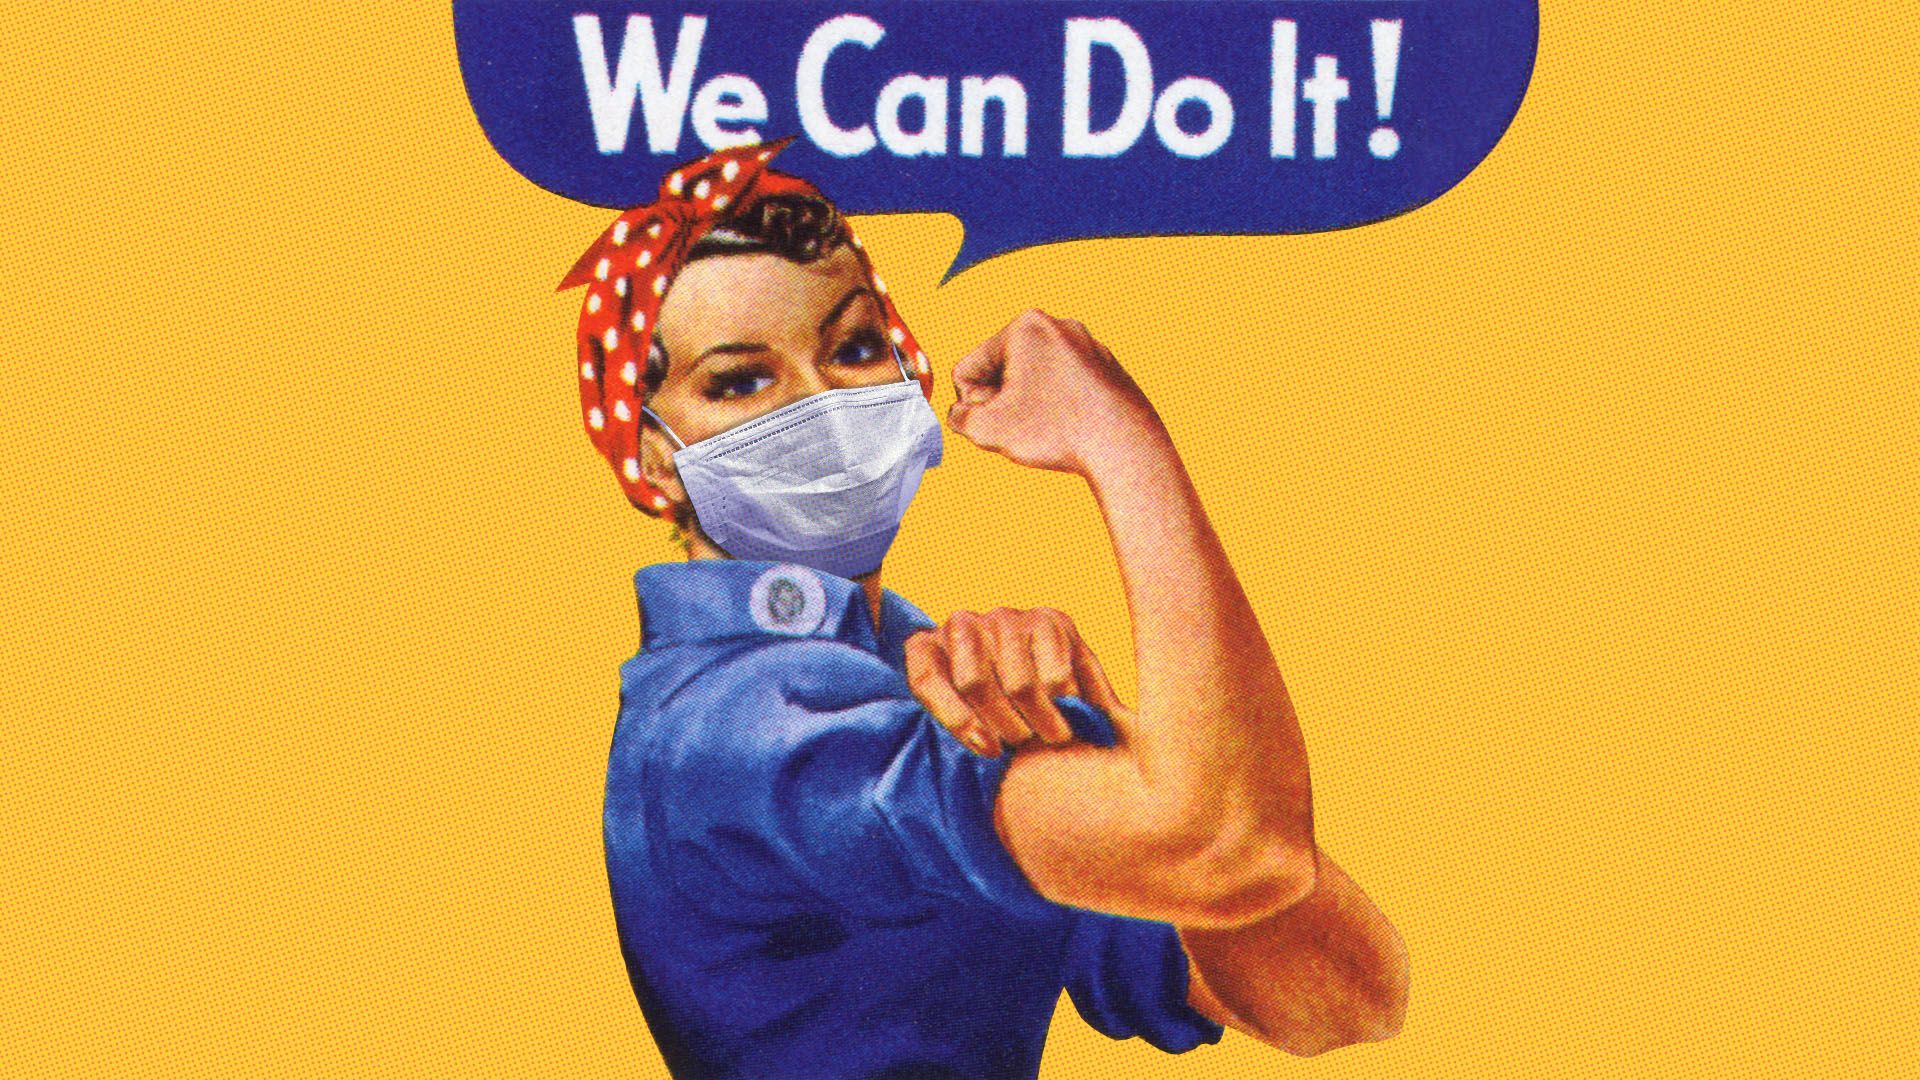 The "We Can Do It!" poster from World War II, with the woman wearing a medical mask over her face.